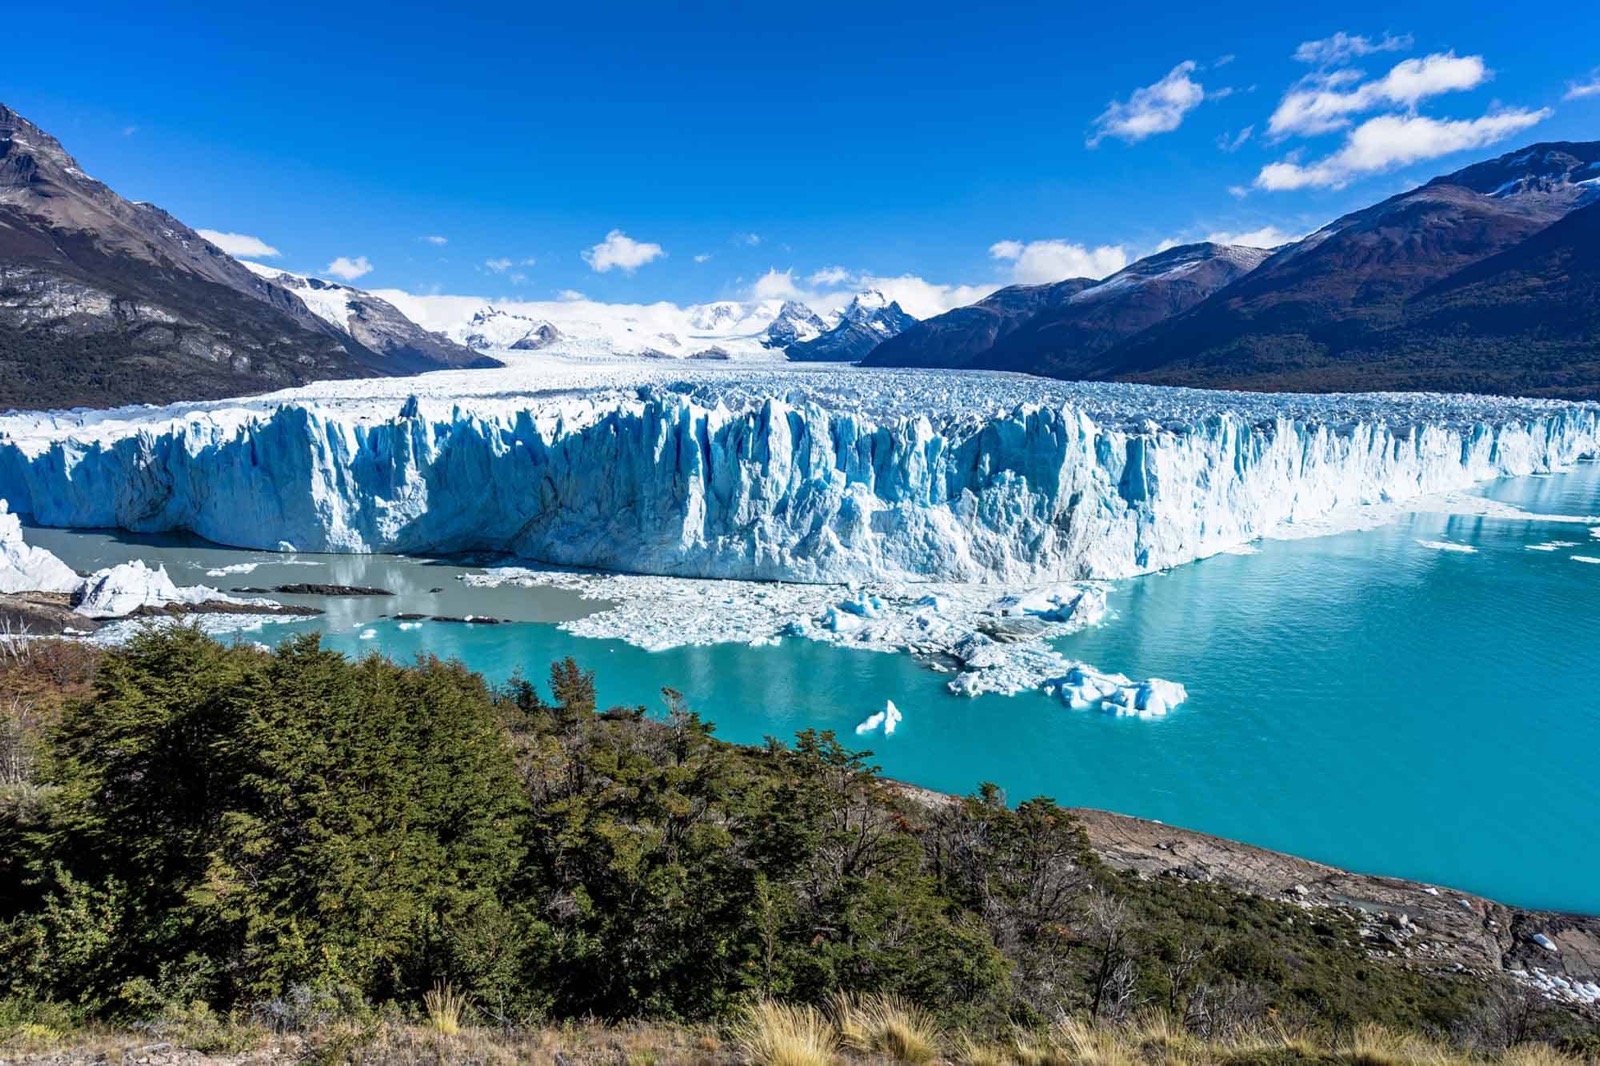 Are You a World Traveler? Test Your Knowledge by Matching These Majestic Natural Sites to Their Countries! Los Glaciares National Park, Perito Moreno Glacier, Argentina